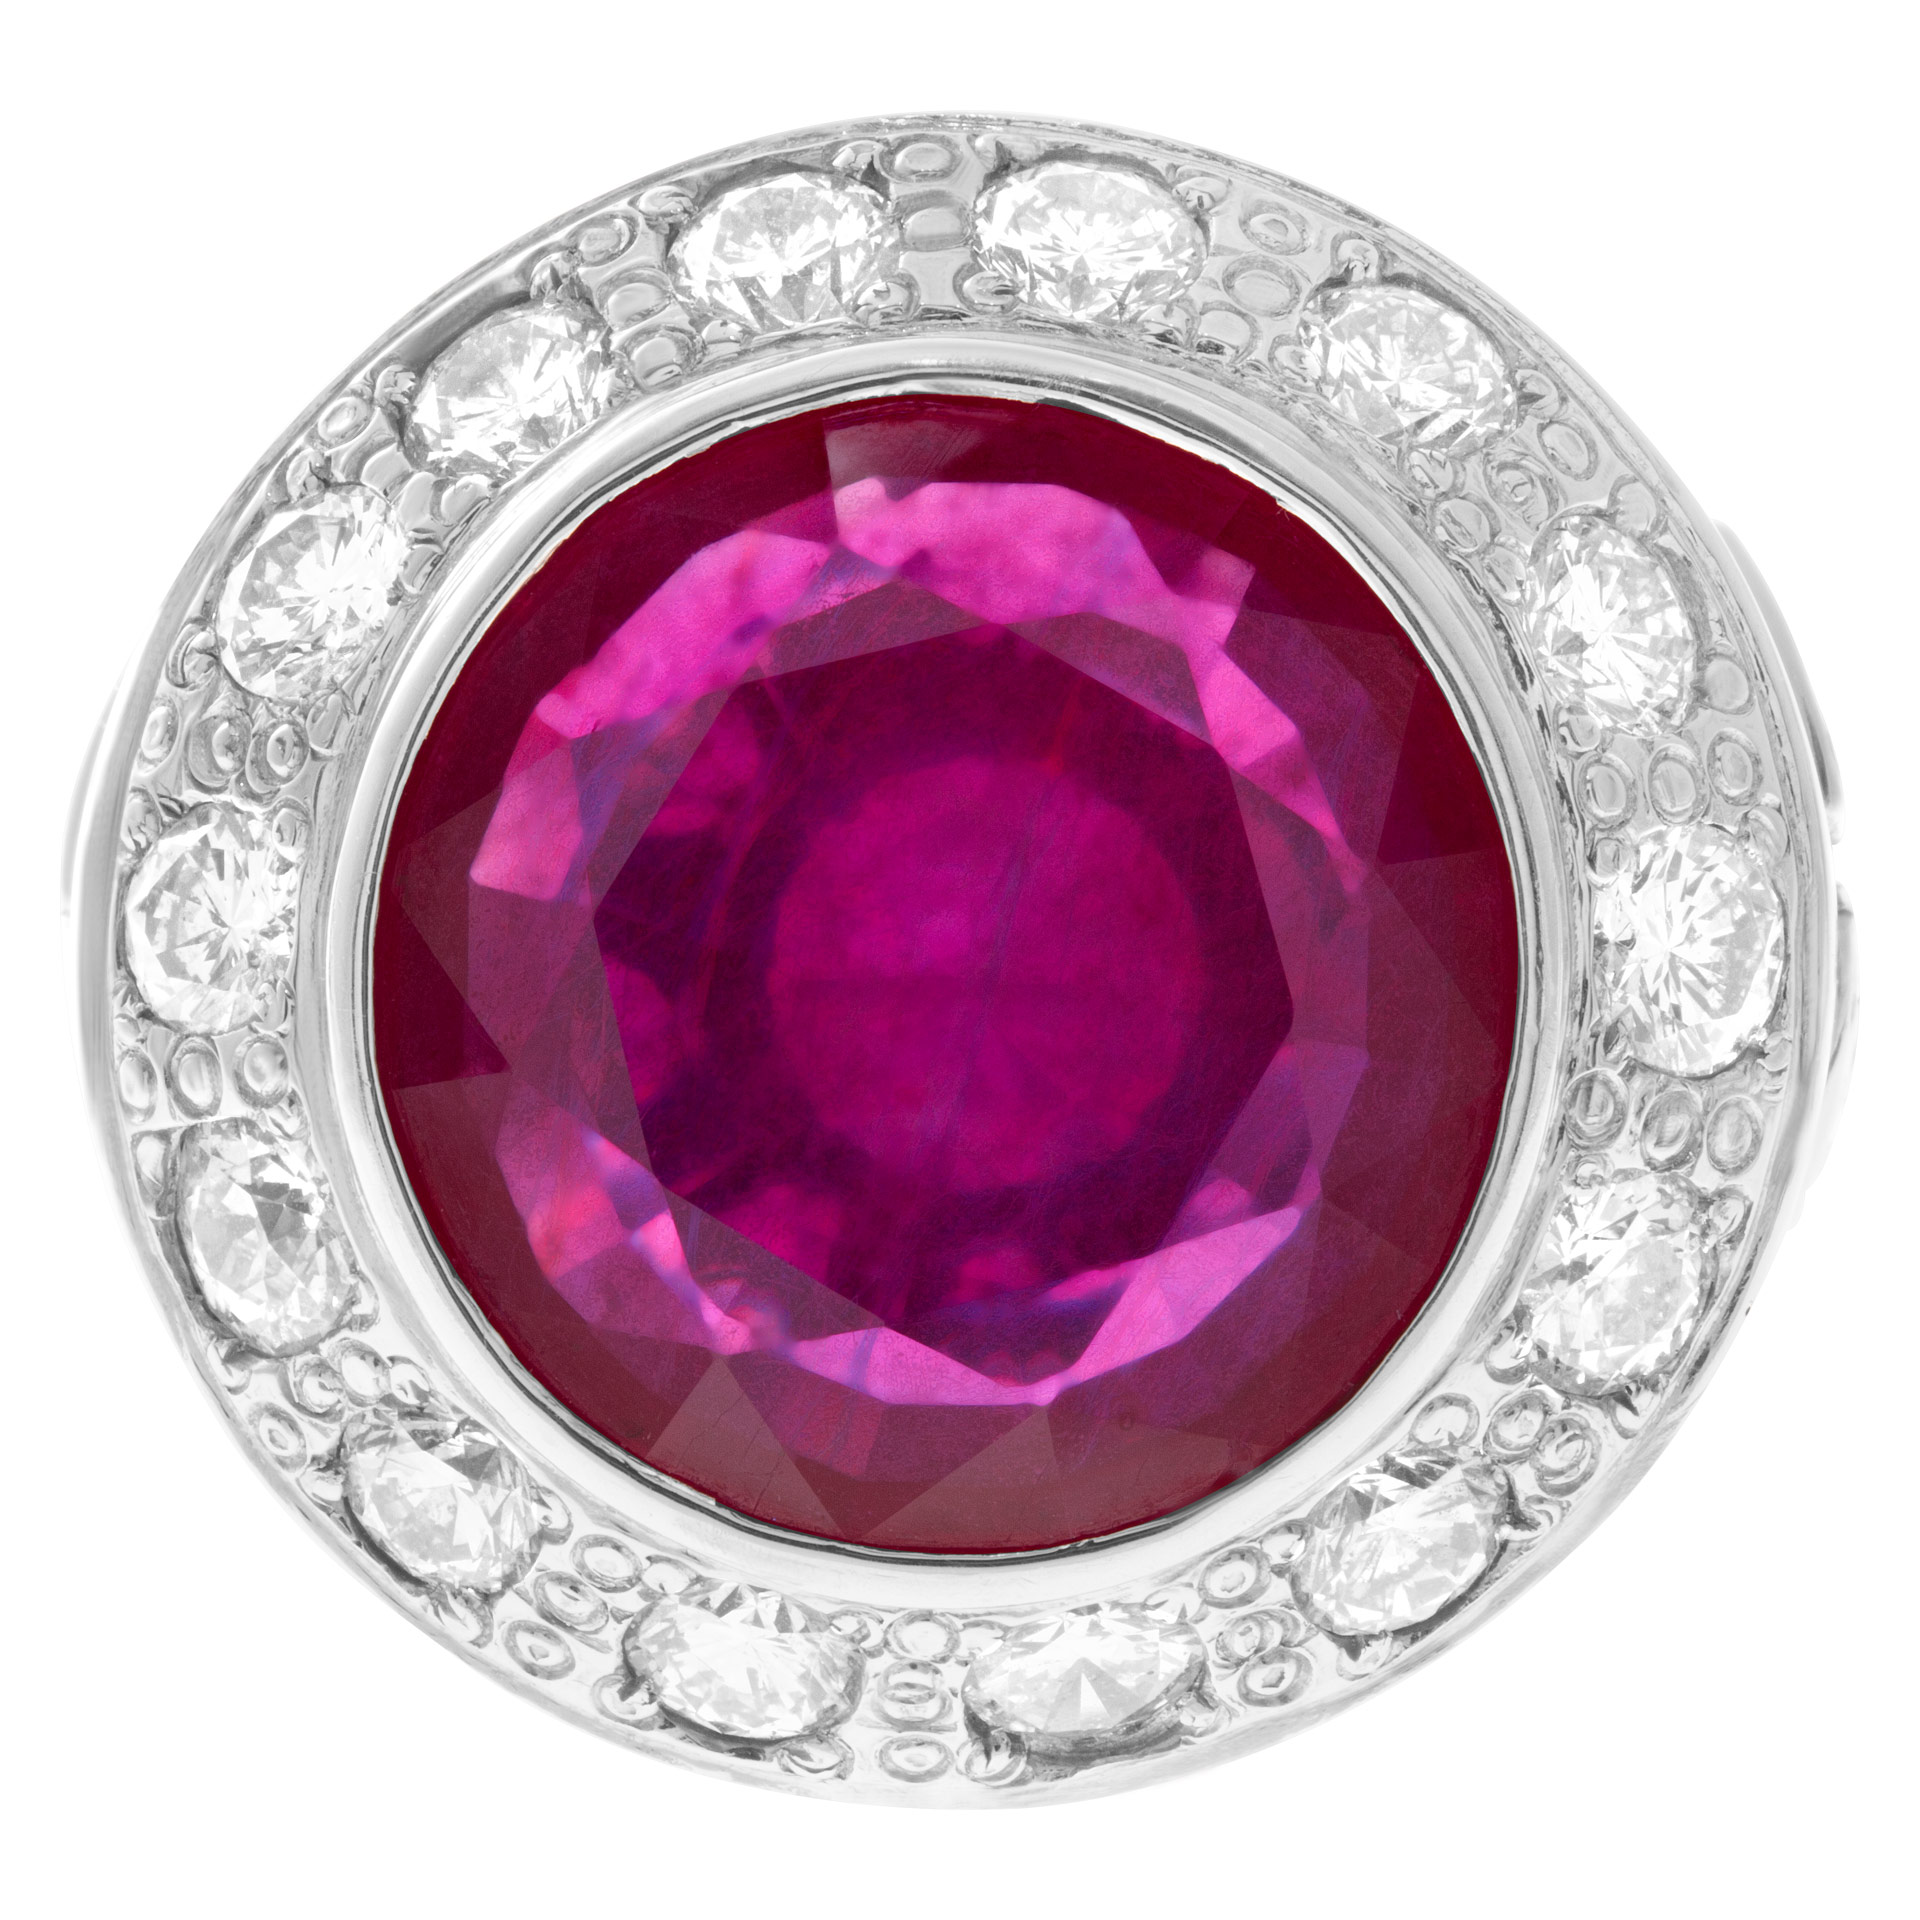 Large and colorful composite filled ruby and diamond ring in 18k white gold surrounded by approximately 5.20 carats round brilliant cut diamonds Composite ruby is approximately 19.20 cts